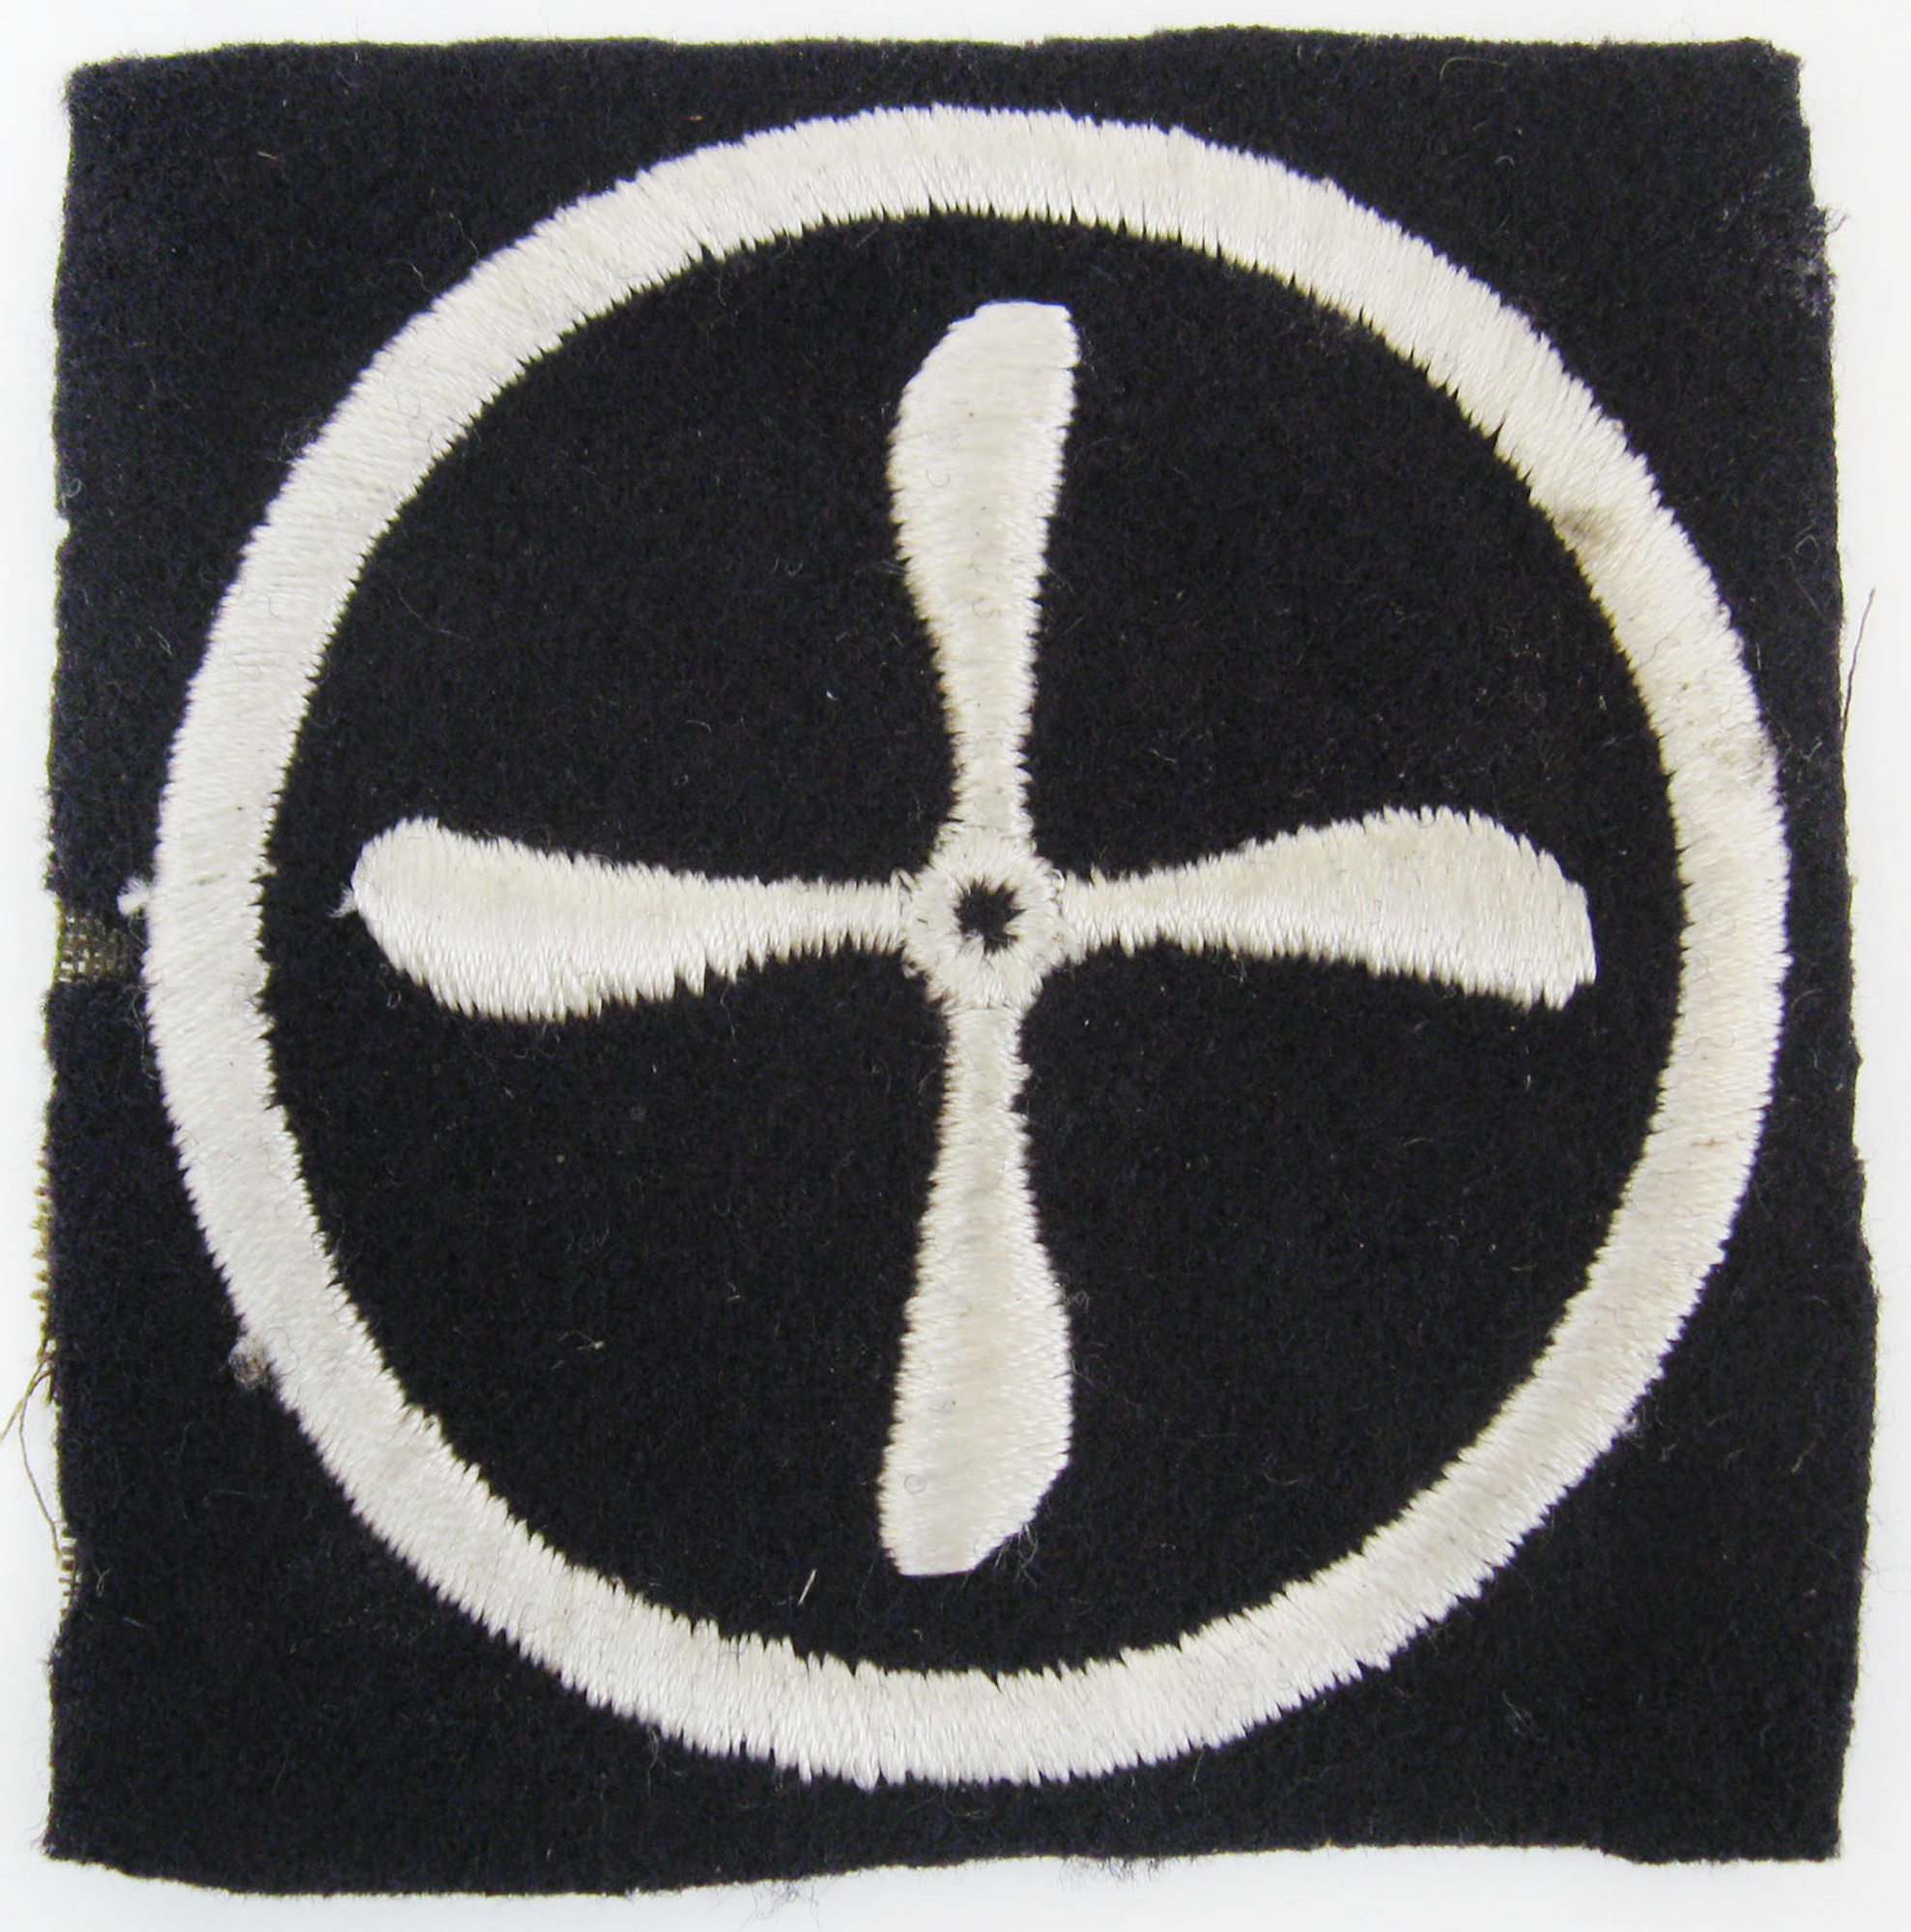 This is an insignia patch worn by aviation mechanics of the U.S. Army Signal Corps, Aviation Section during World War I. On May 24, 1918, President Woodrow Wilson transferred the Aviation Section from the Signal Corps to the newly established U.S. Army Air Service. The U.S. Army Air Service was a forerunner of today's United States Air Force. (U.S. Air Force photo)